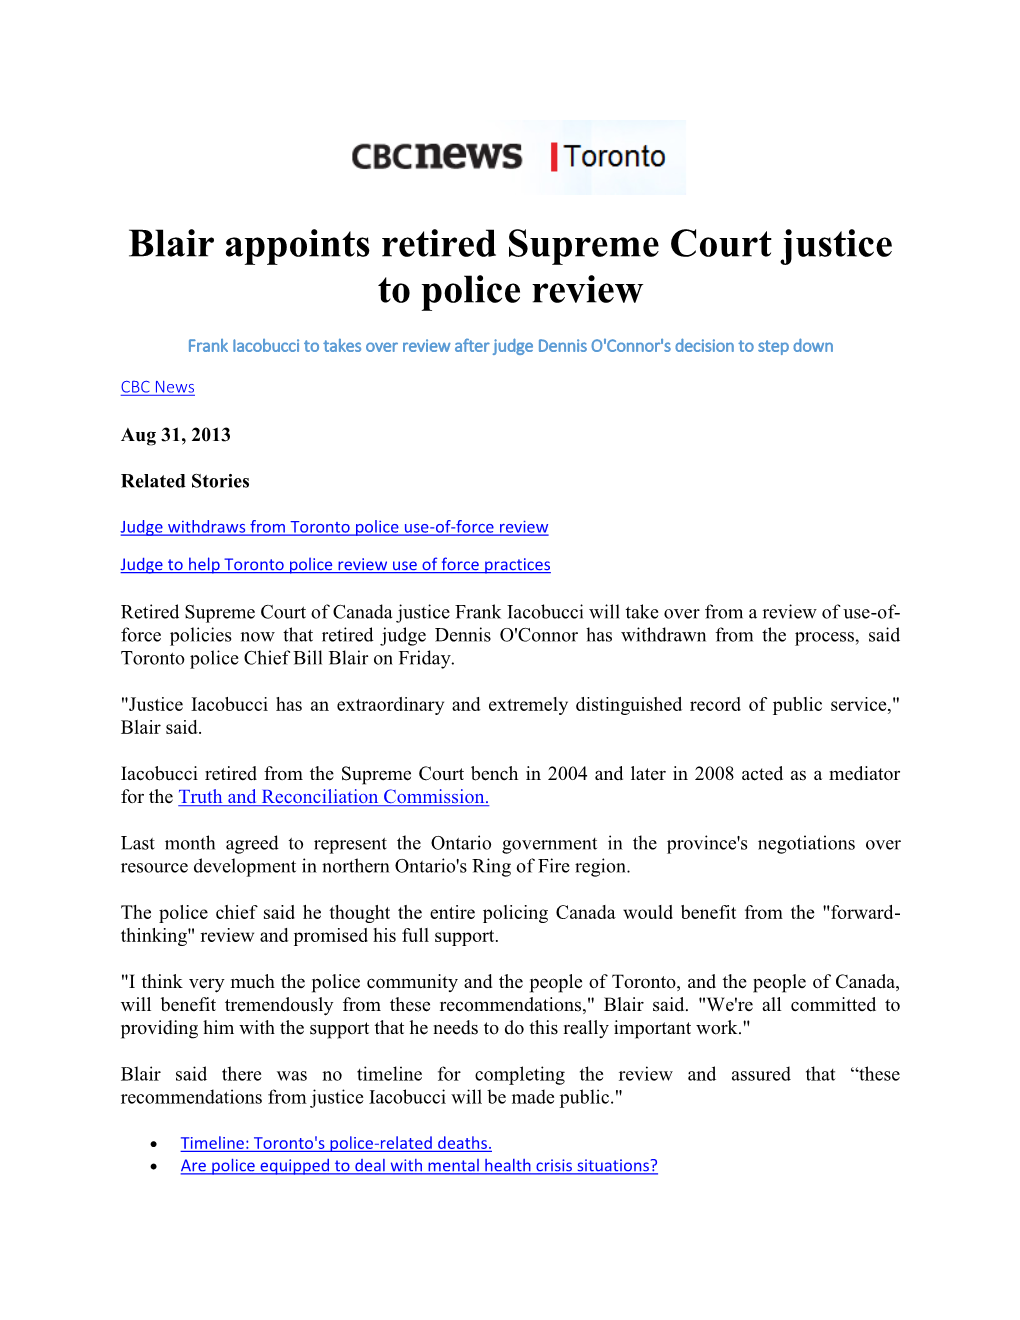 Blair Appoints Retired Supreme Court Justice to Police Review